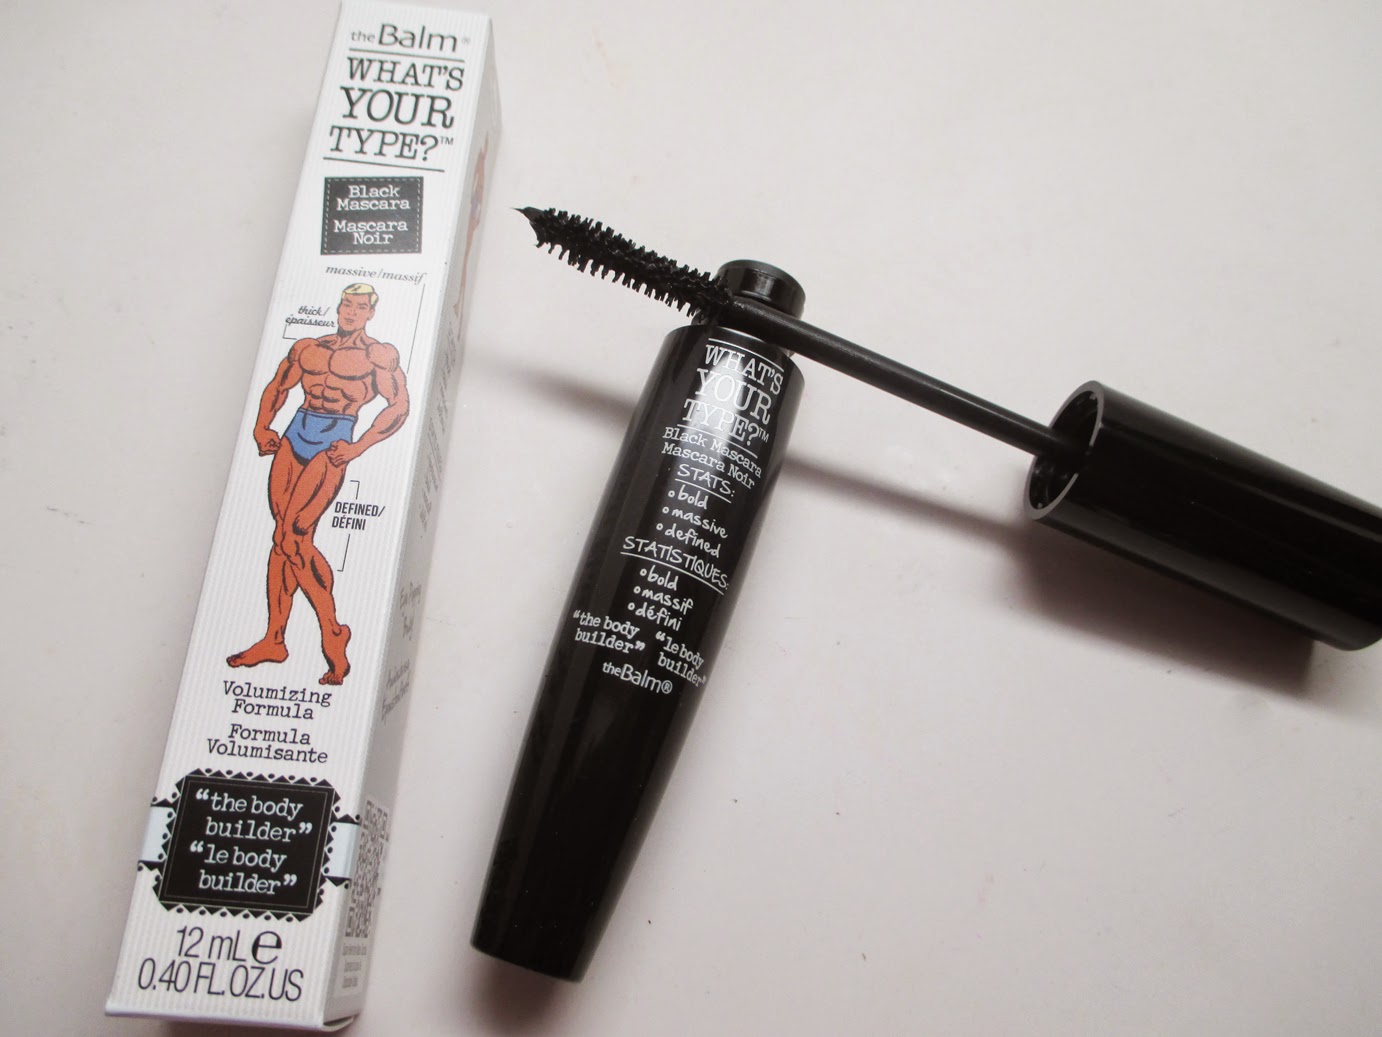 Farvel Sandet Venture Review: The Balm Read My Lips Lipgloss and More! | Makeup By RenRen